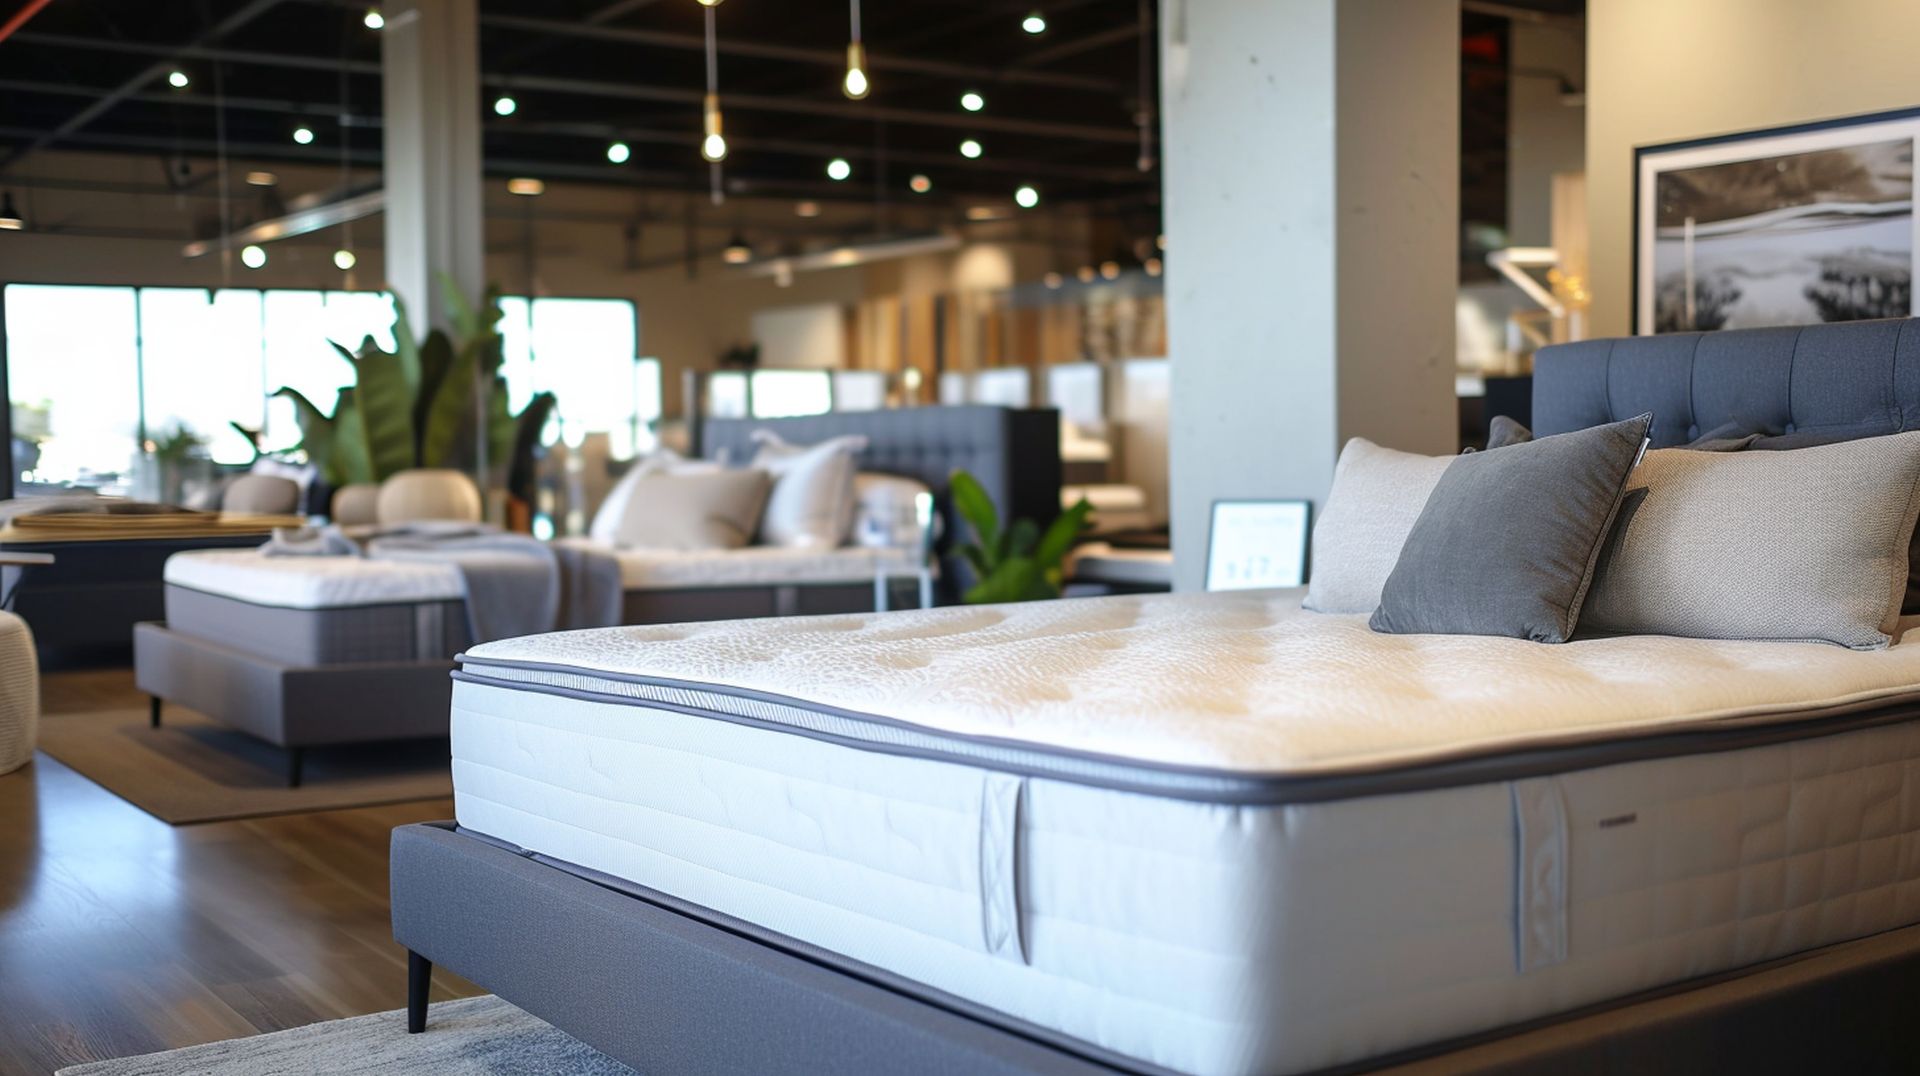 If you're looking for a new bed, mattress stores in East Providence offer the best customer and delivery service, financing, and warranties in Rhode Island